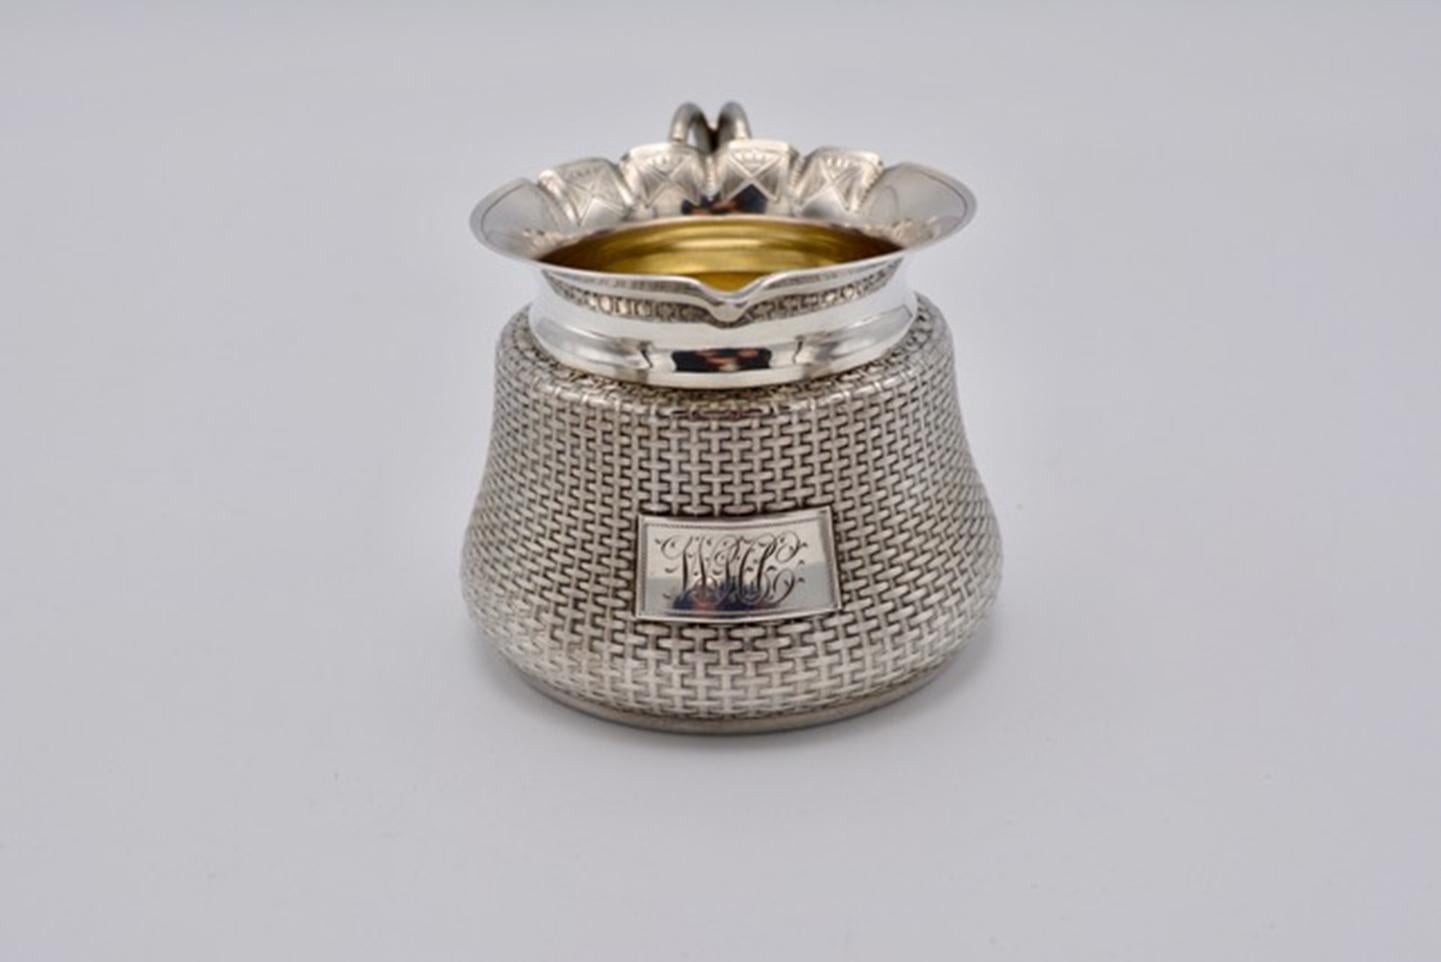 Unique Wood and Hughes sterling silver Japaneseque basket-weave design tea set. Approx. total weight: 32 troy ounces. Teapot measures 5”, Creamer 3” and sugar bowl 5.5” (including the handle).) In the form of traditional woven baskets. Beautiful